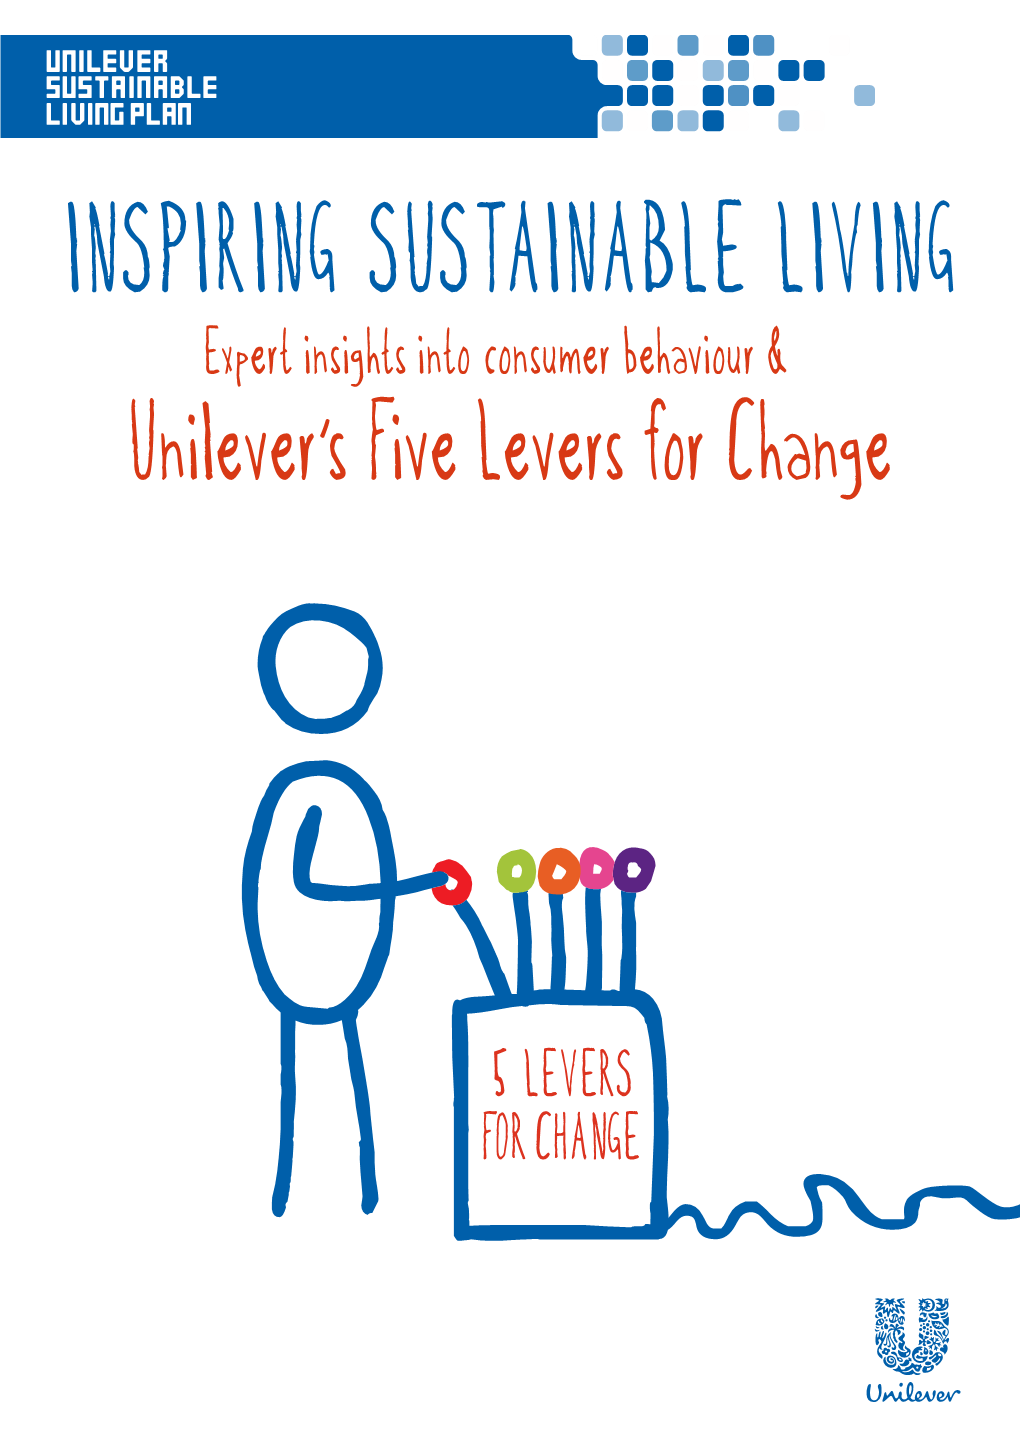 Unilever's Five Lever's for Change